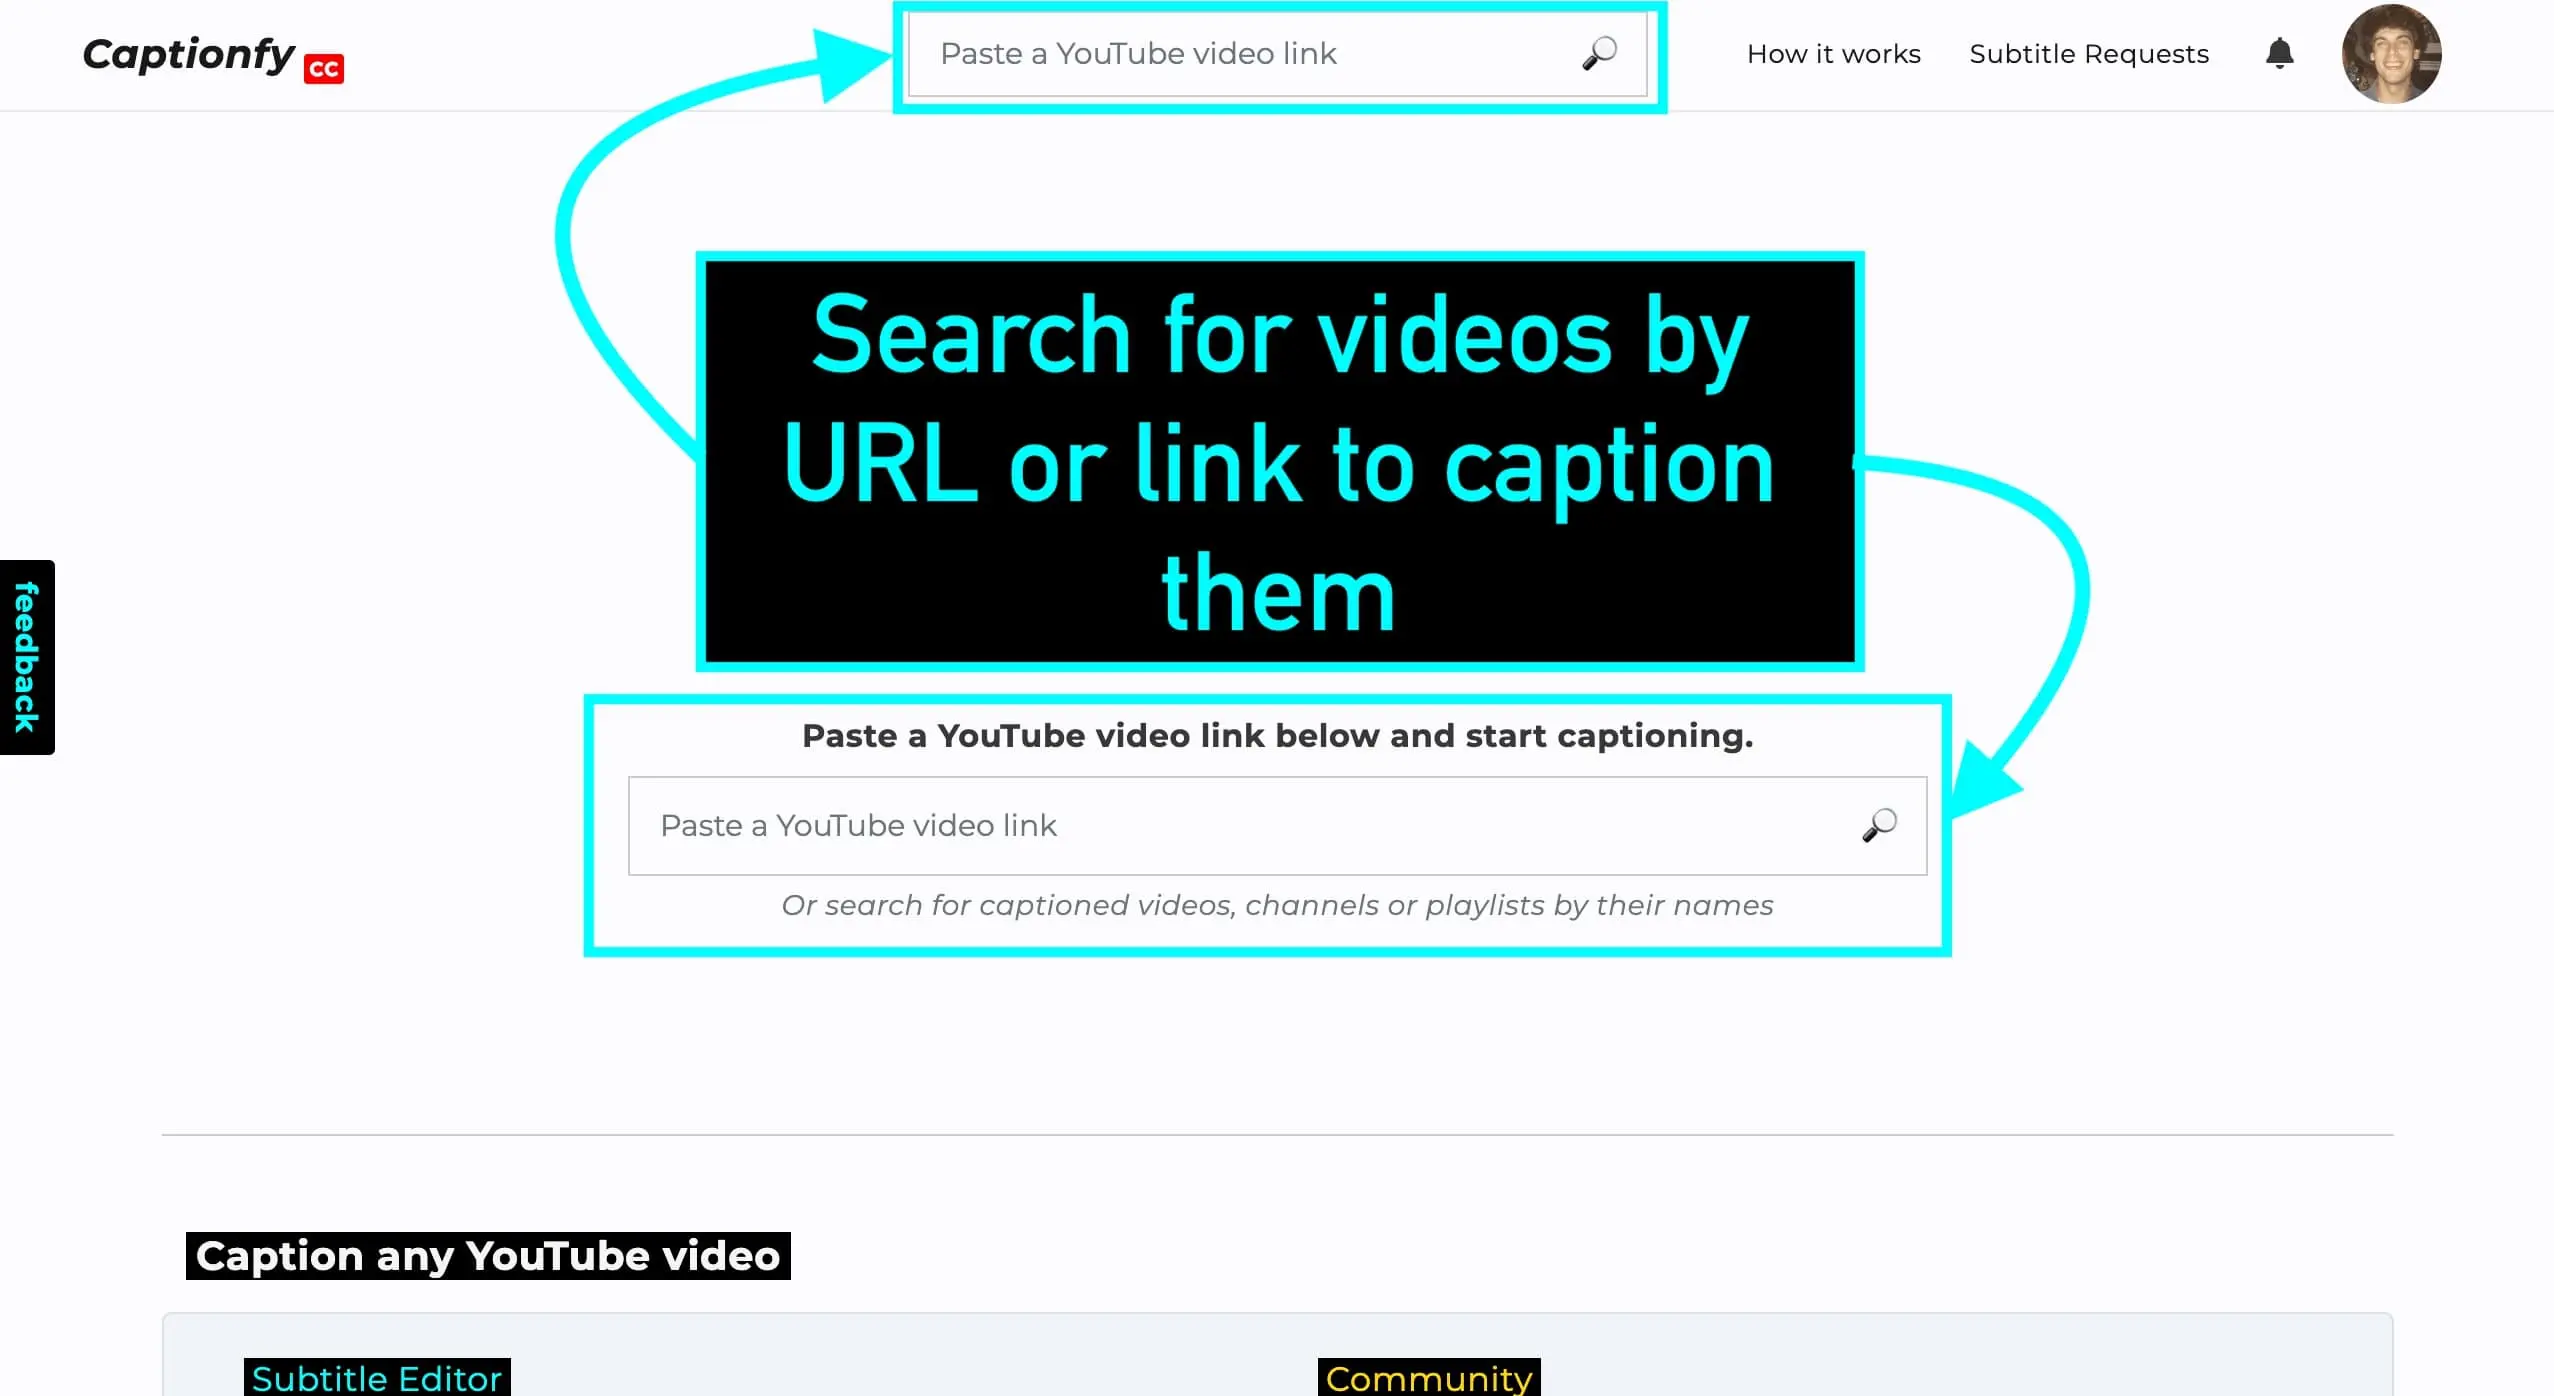 Captionfy search functionality